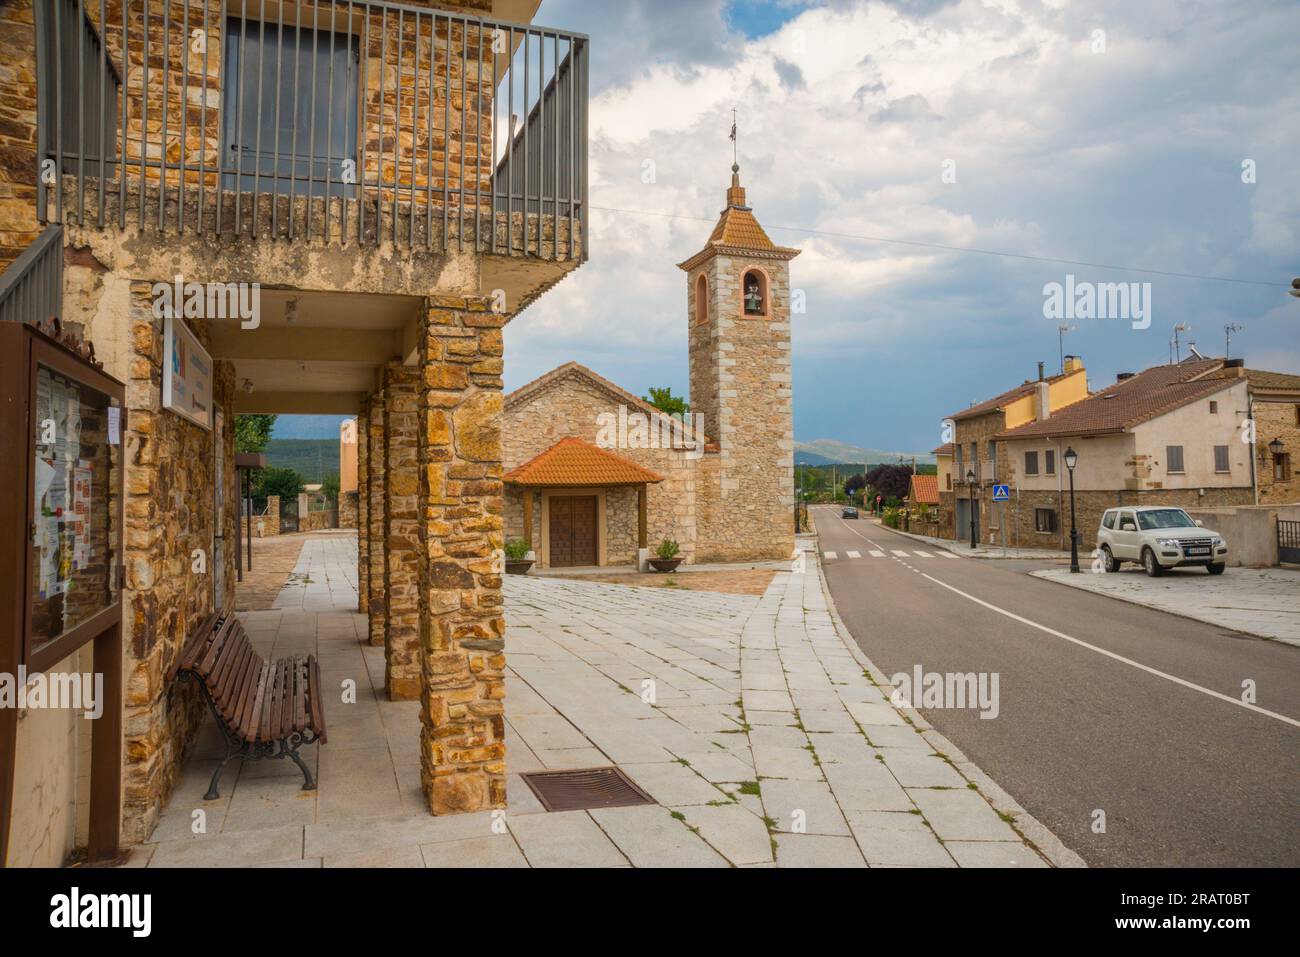 Town hall and church. Gandullas, Madrid province, Spain. Stock Photo